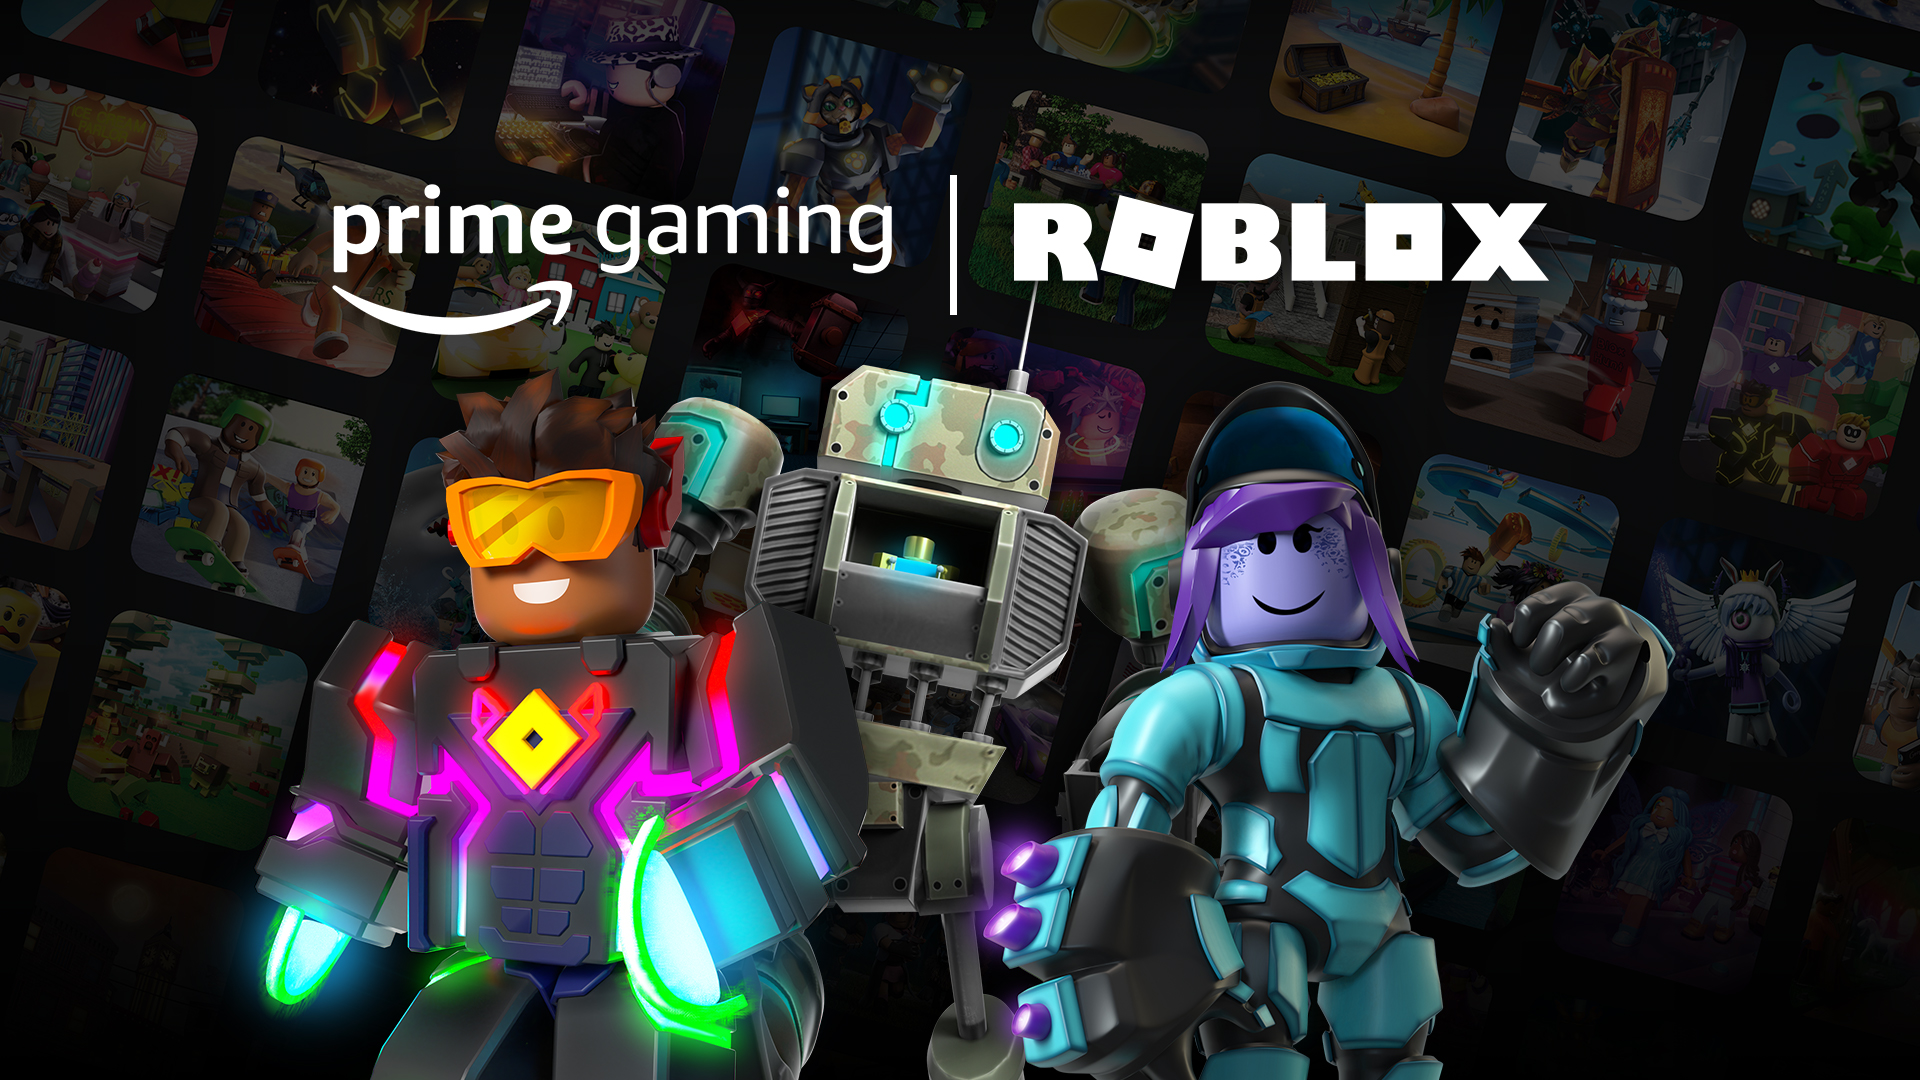 Redeem Roblox Cards Free Codes 2021